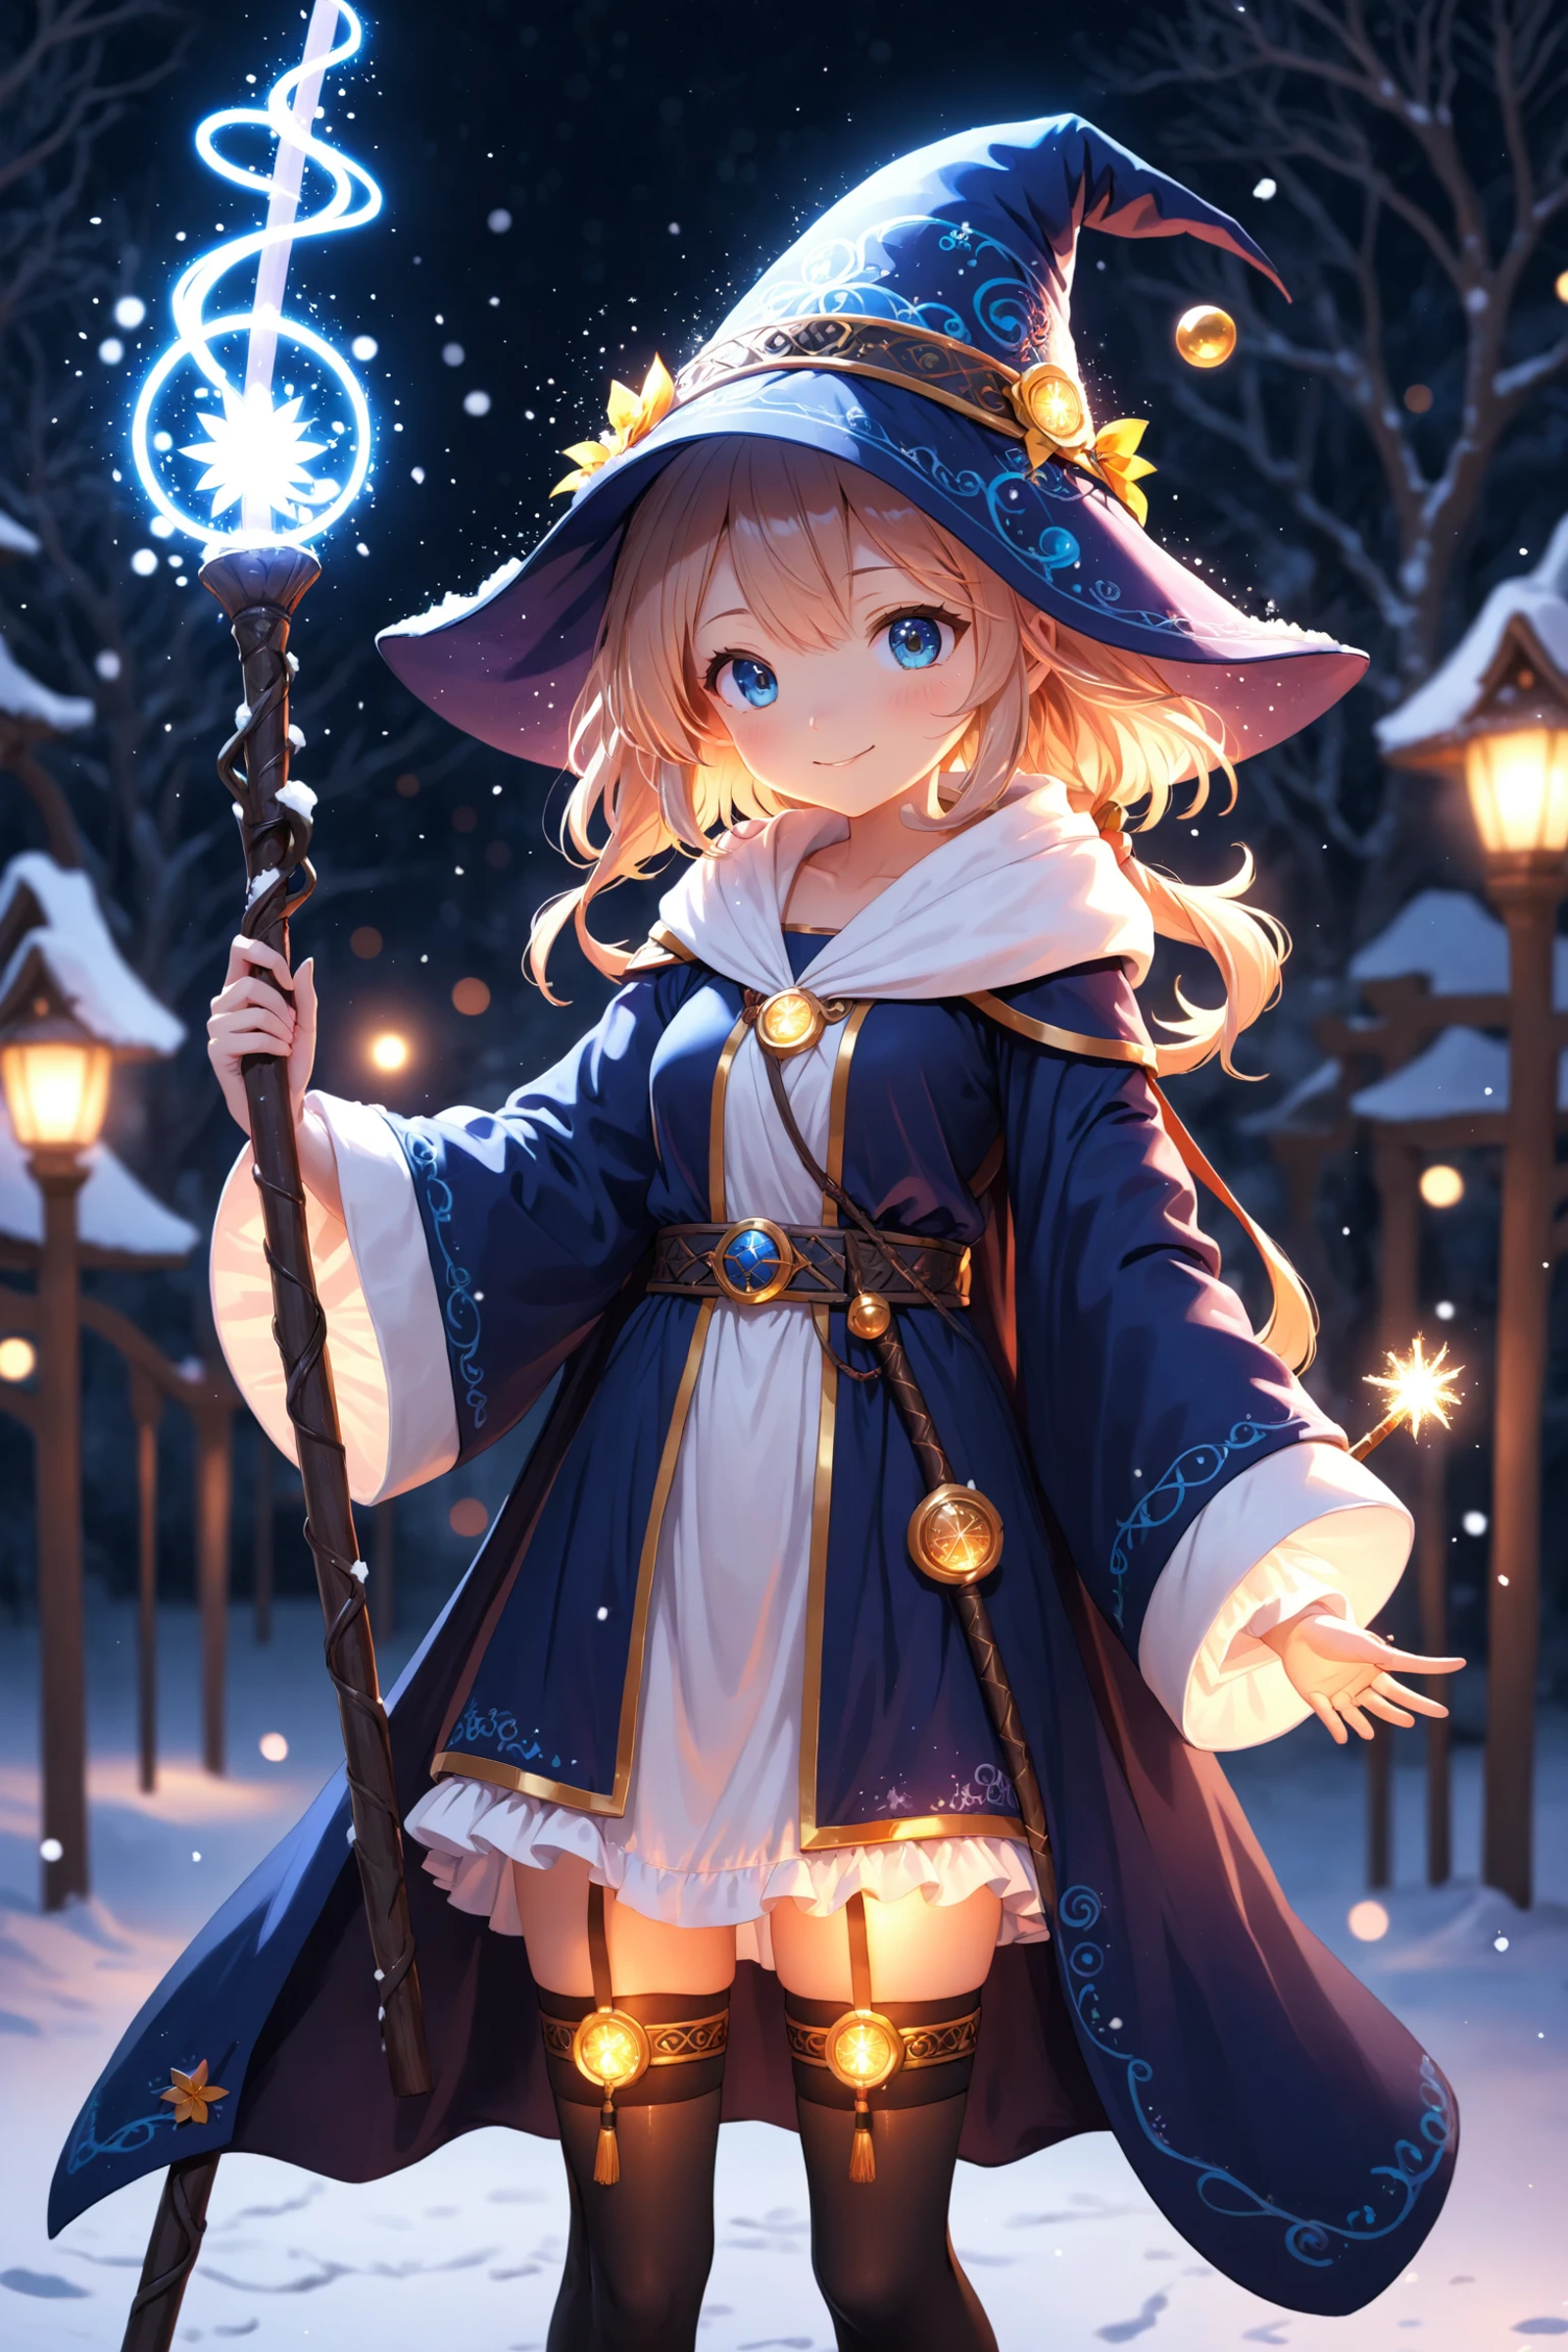 anime, cute girl, wizard hat, robe, thigh-highs, holding ancient staff, happy, midnight, bloom, ambient occlusion, glow, g...